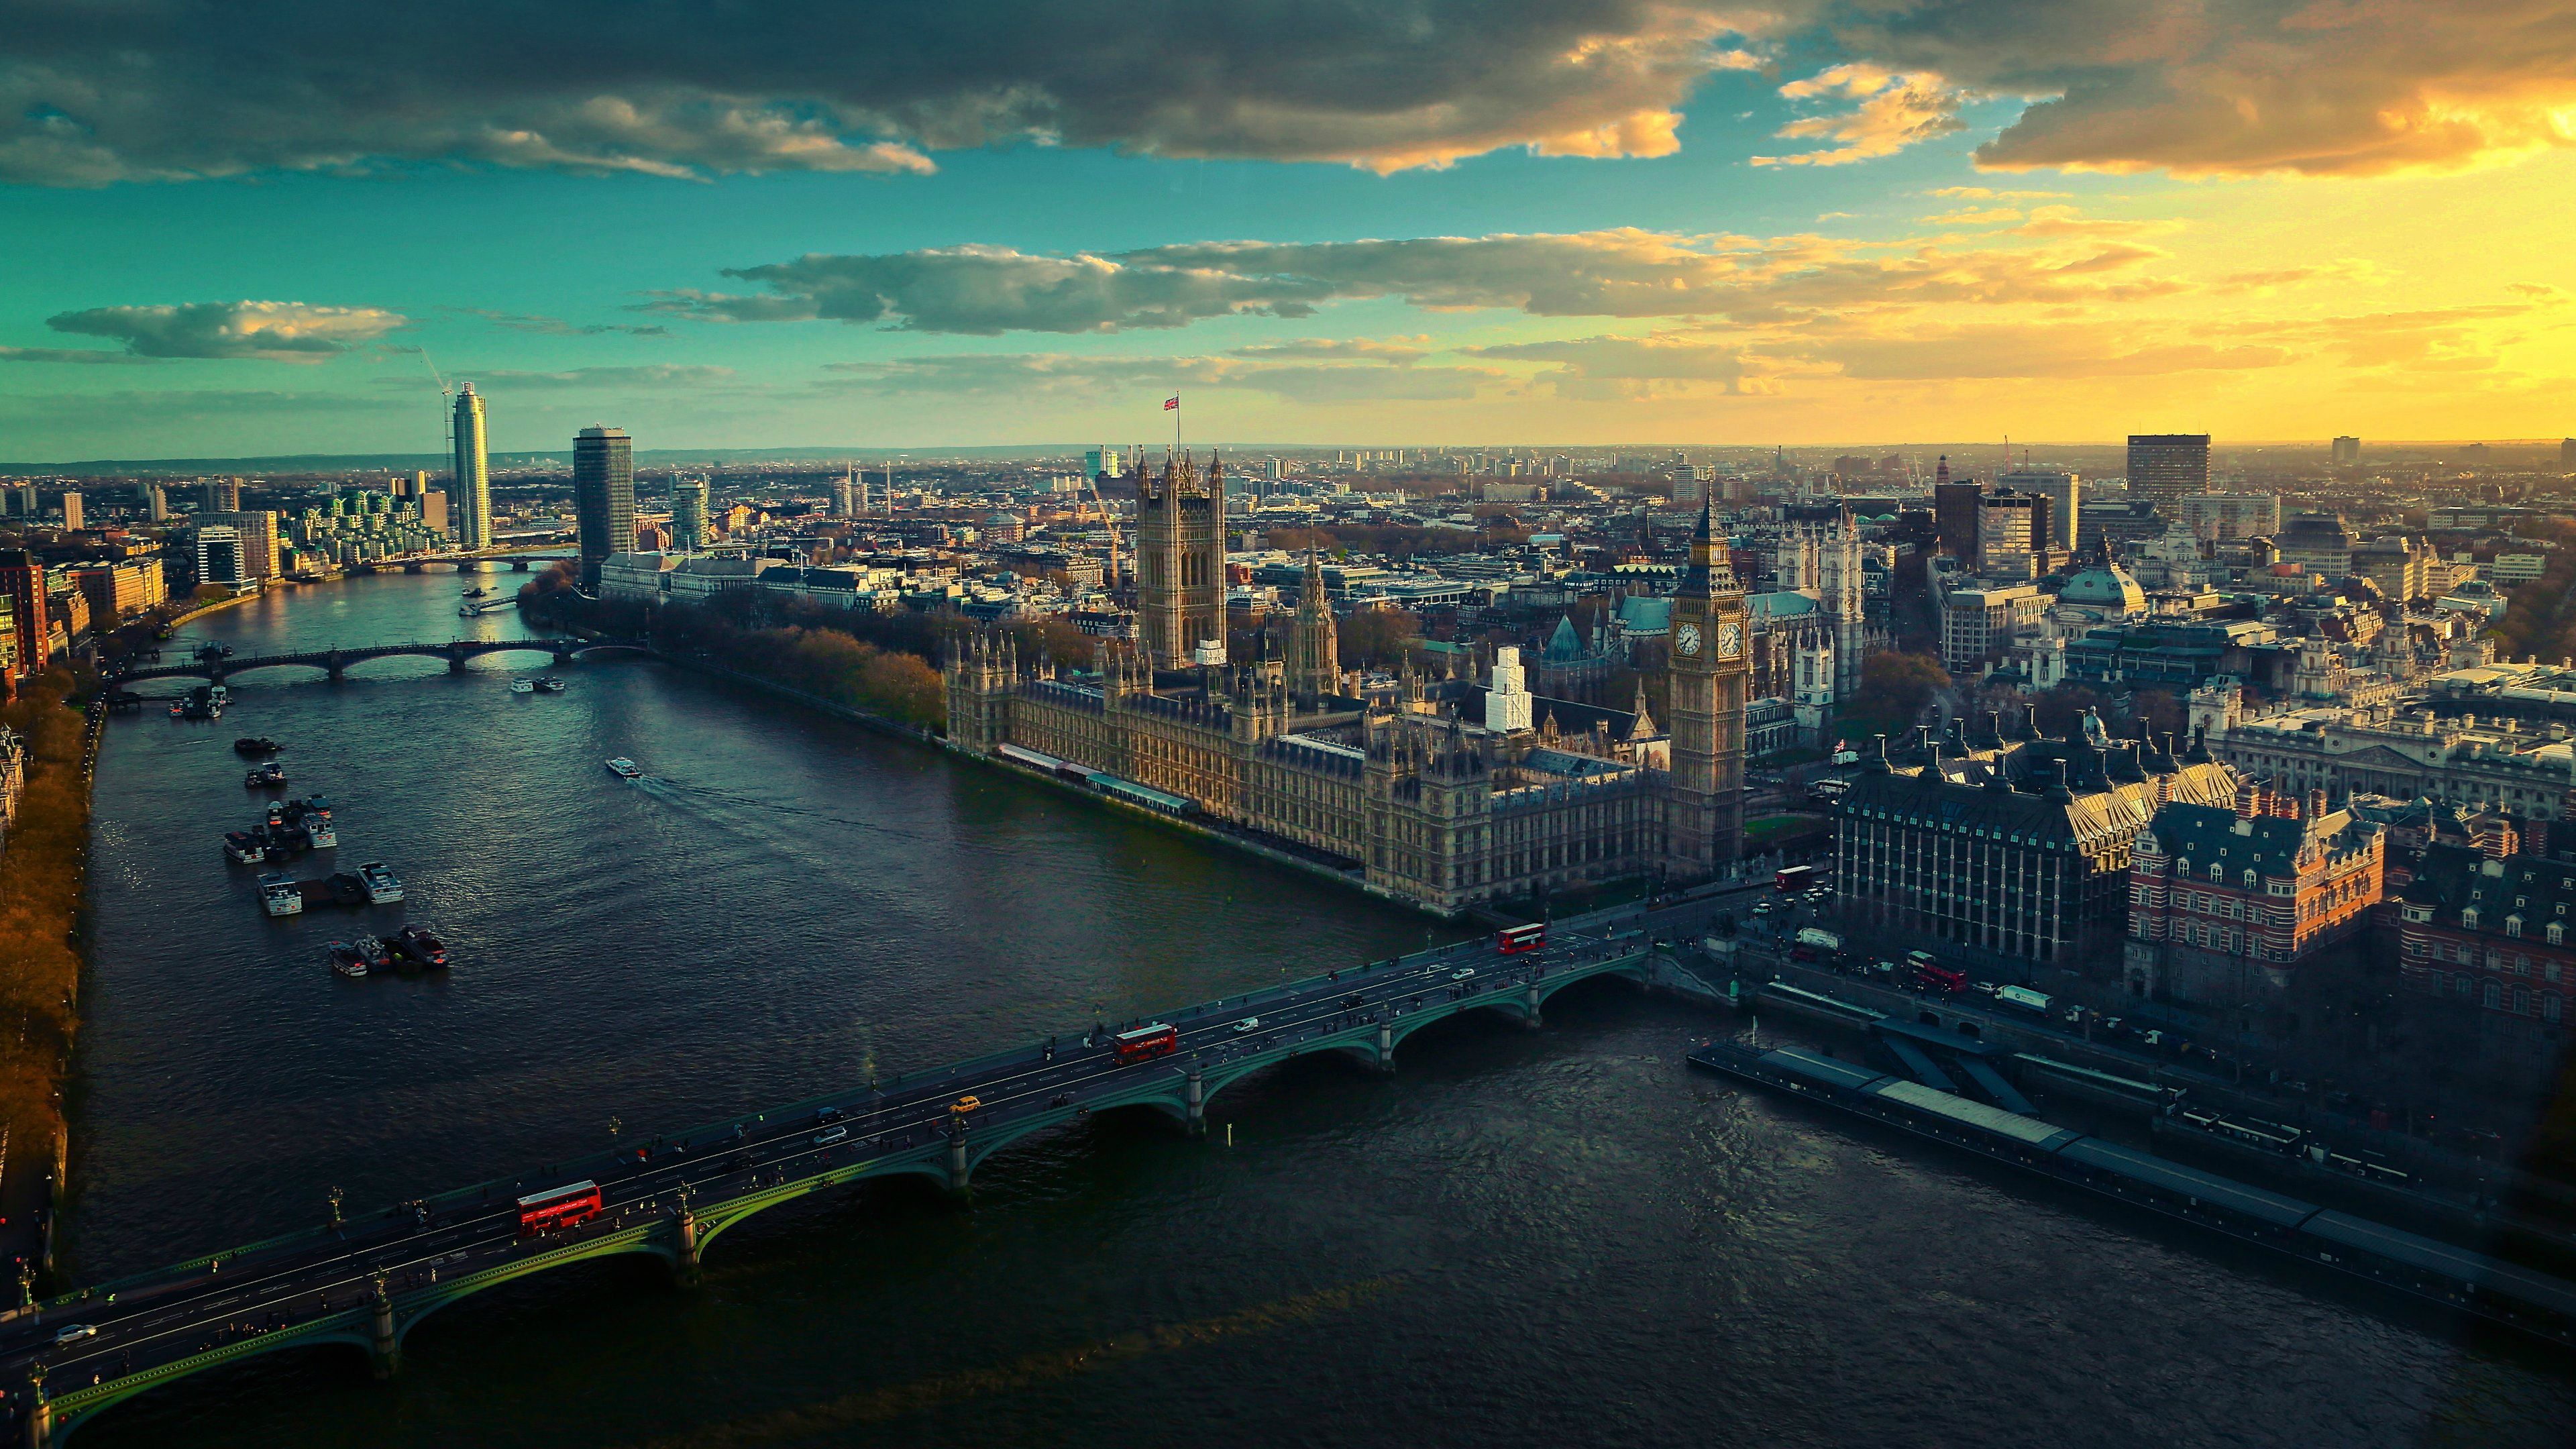 London 4k Wallpapers For Your Desktop Or Mobile Screen Free And Easy To Download